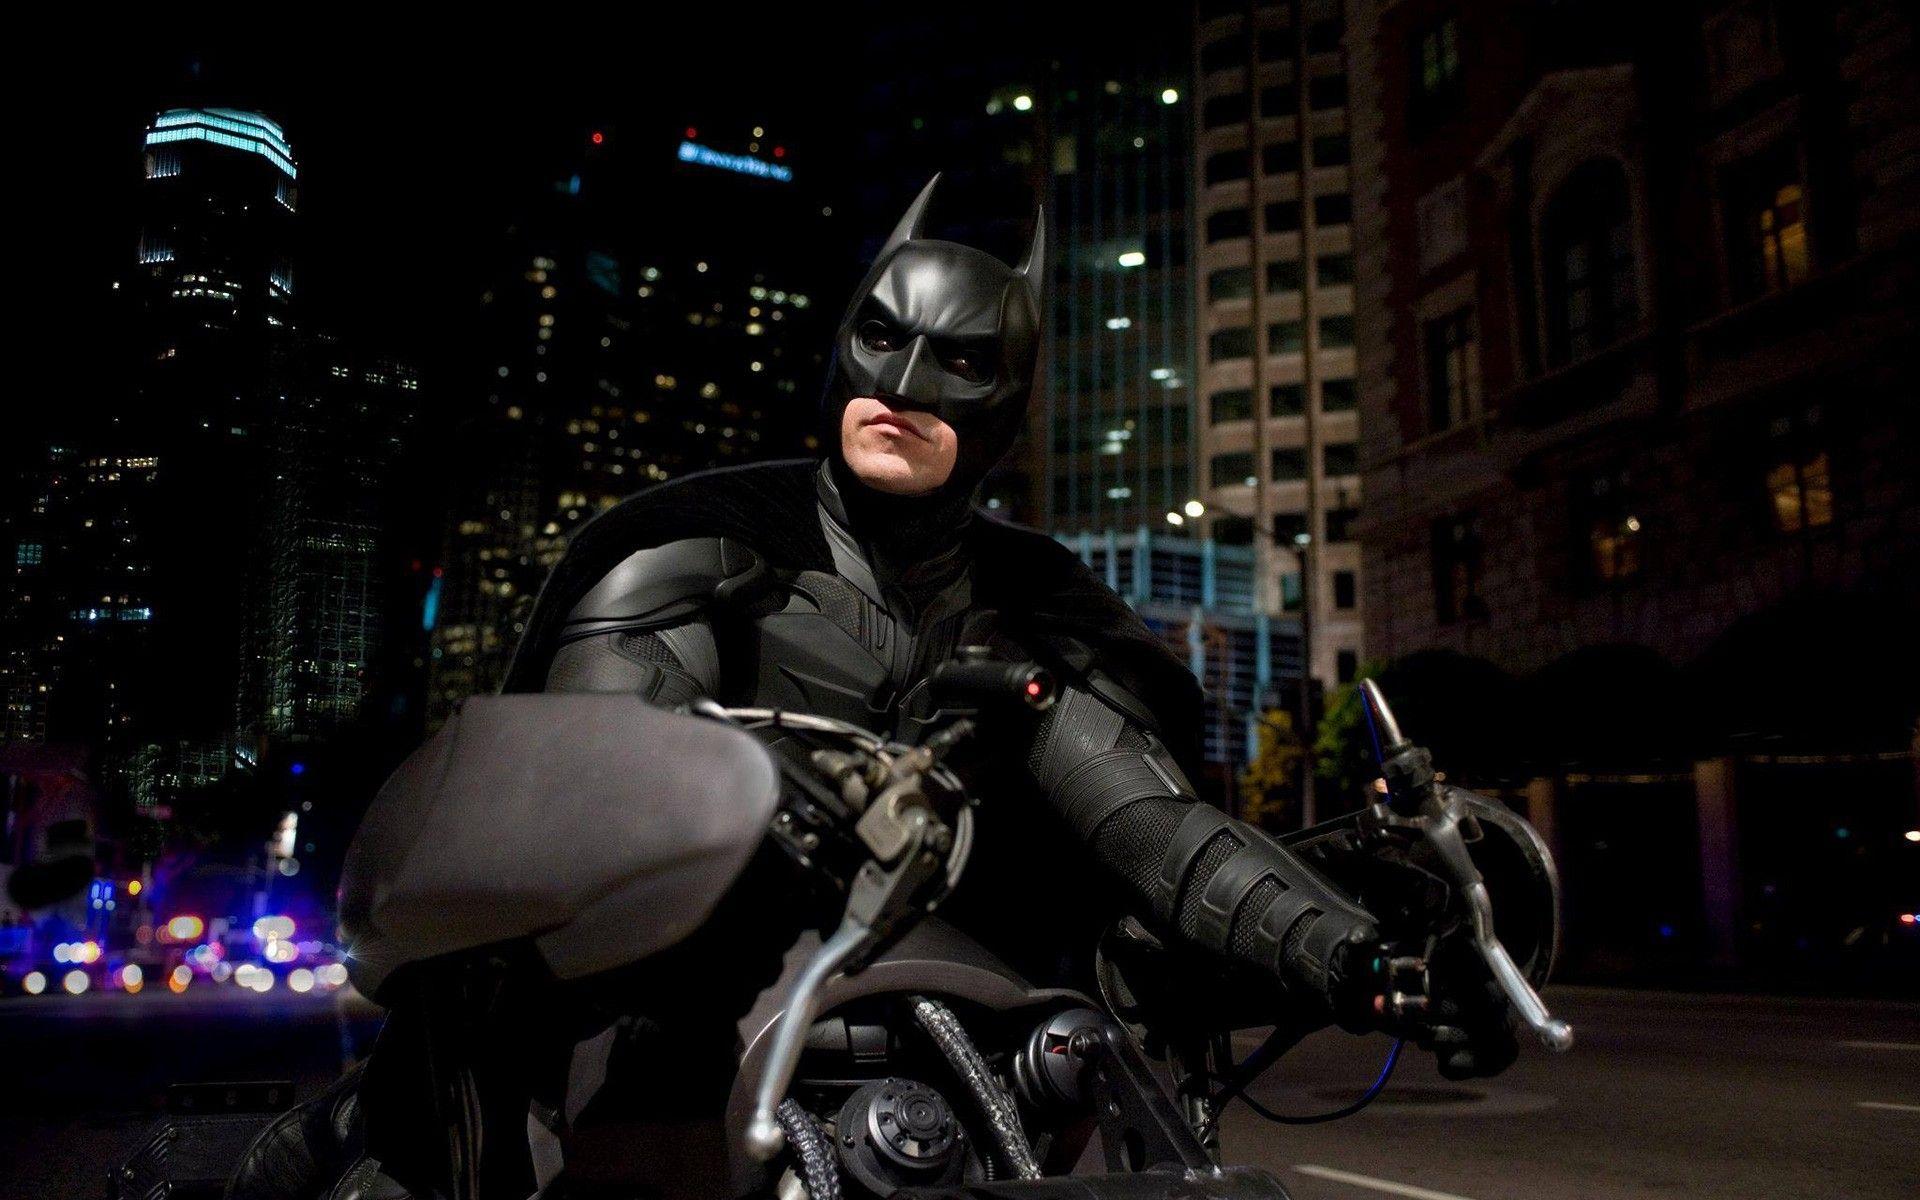 Batman on Bike. Android wallpaper for free